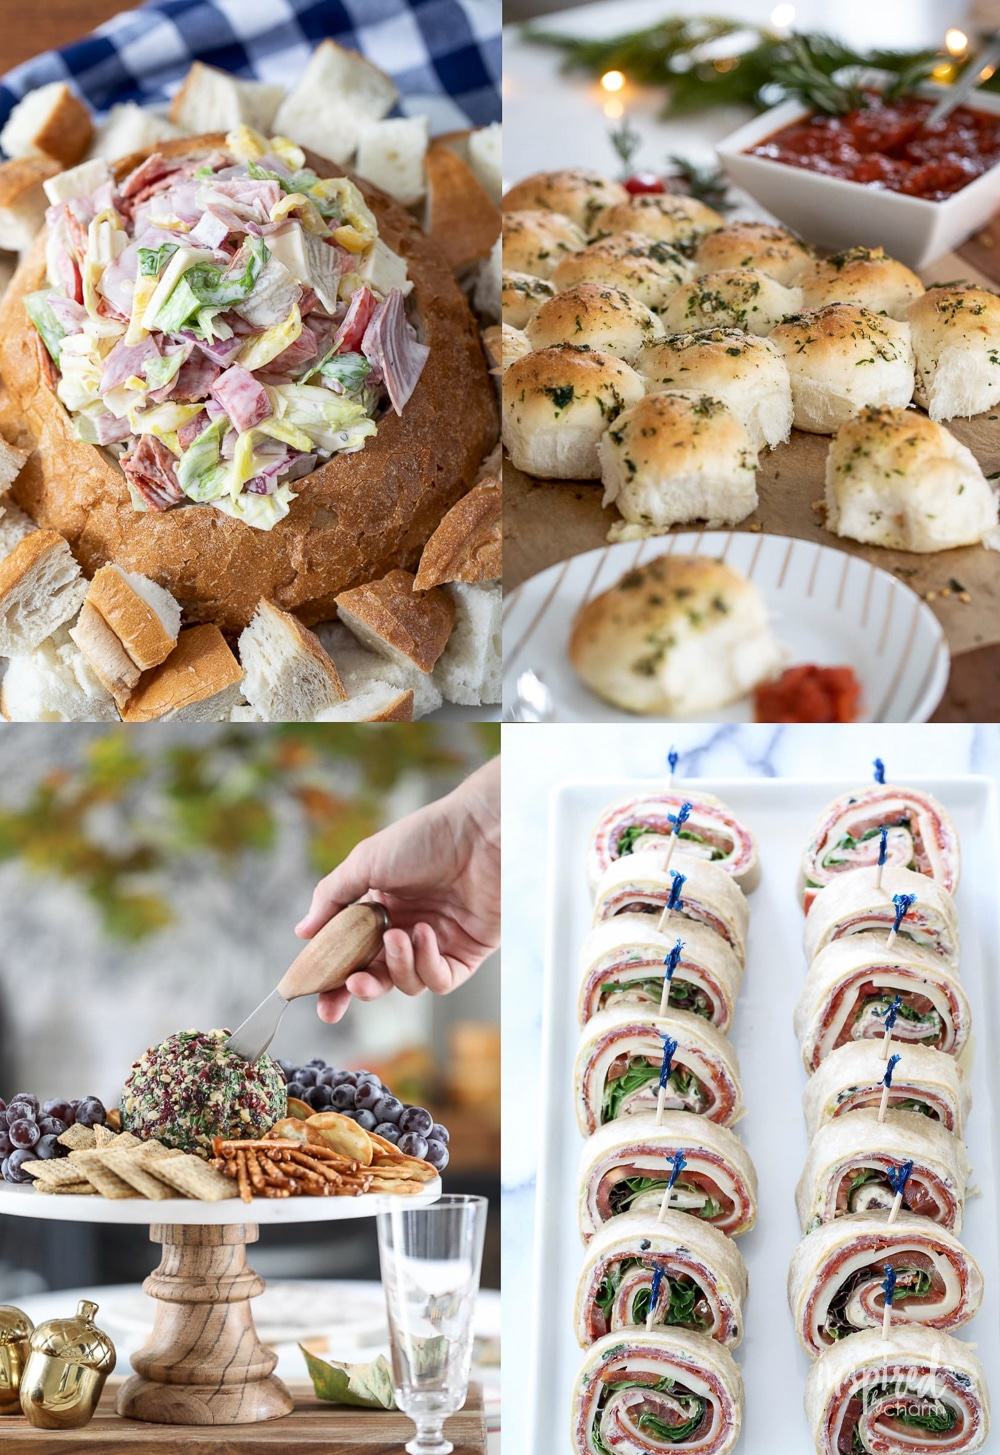 Easy Appetizers For A Crowd That Everyone Will Love!